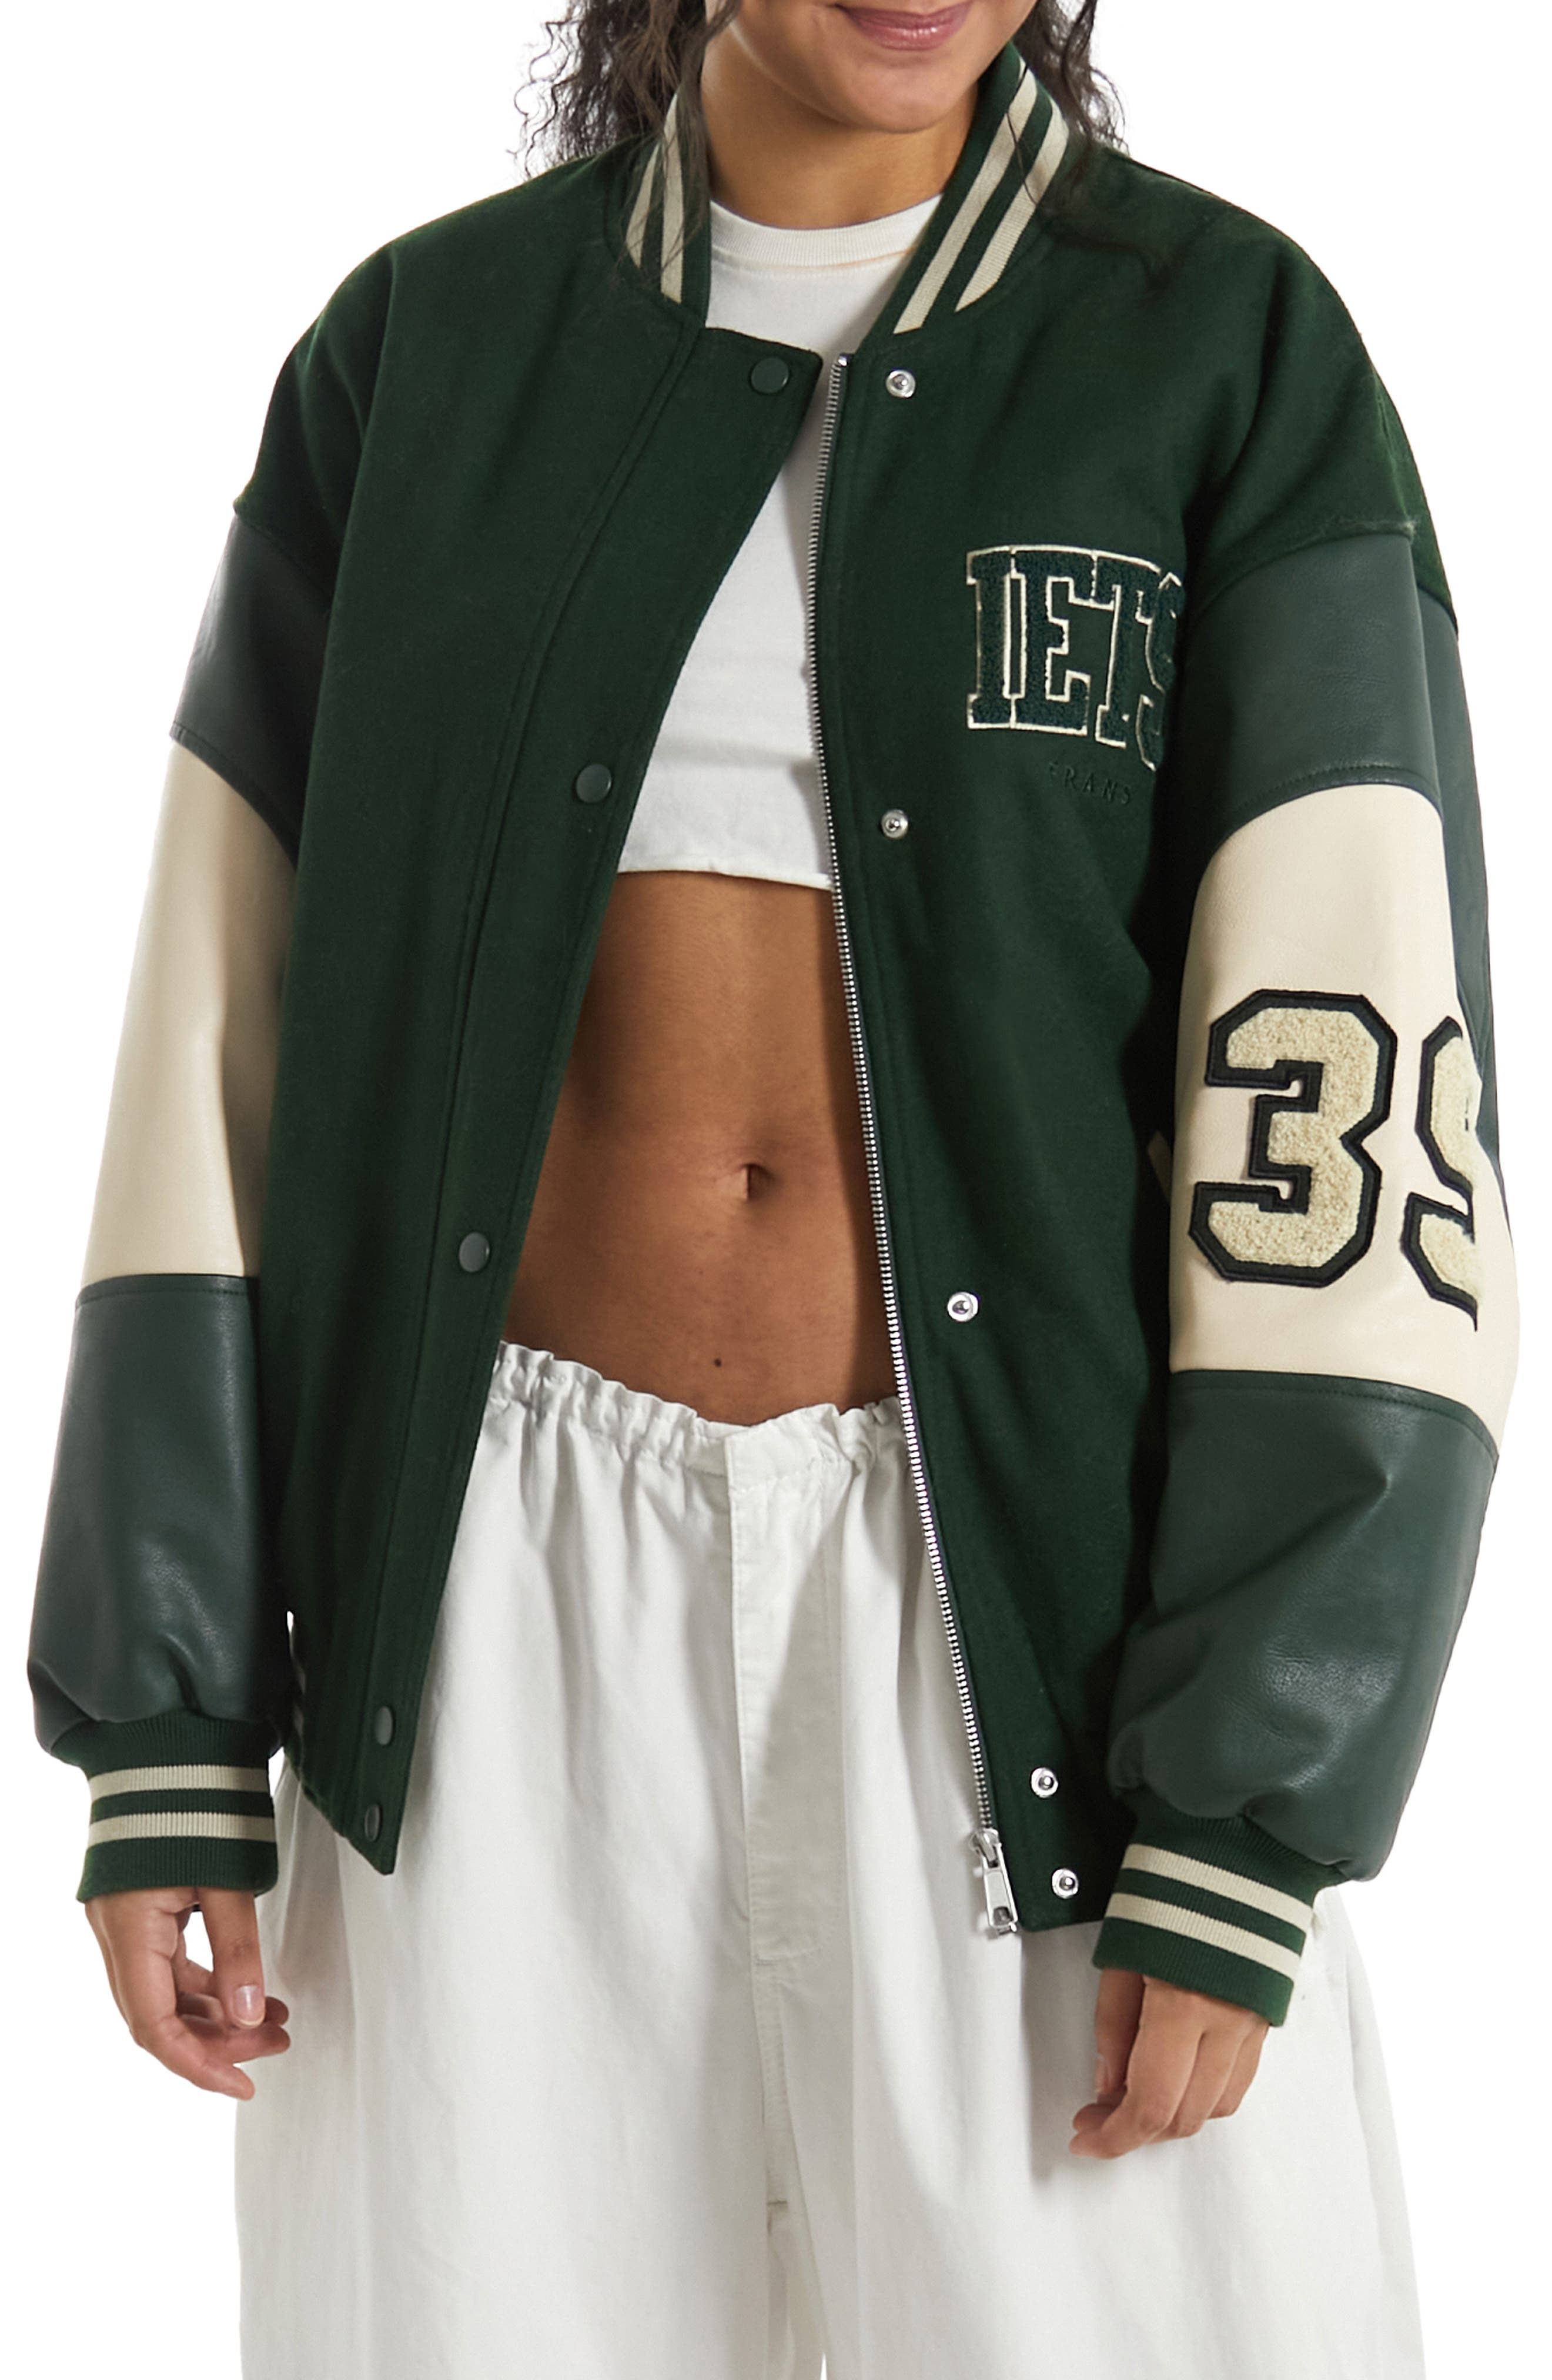 varsity jacket outfits for girls｜TikTok Search